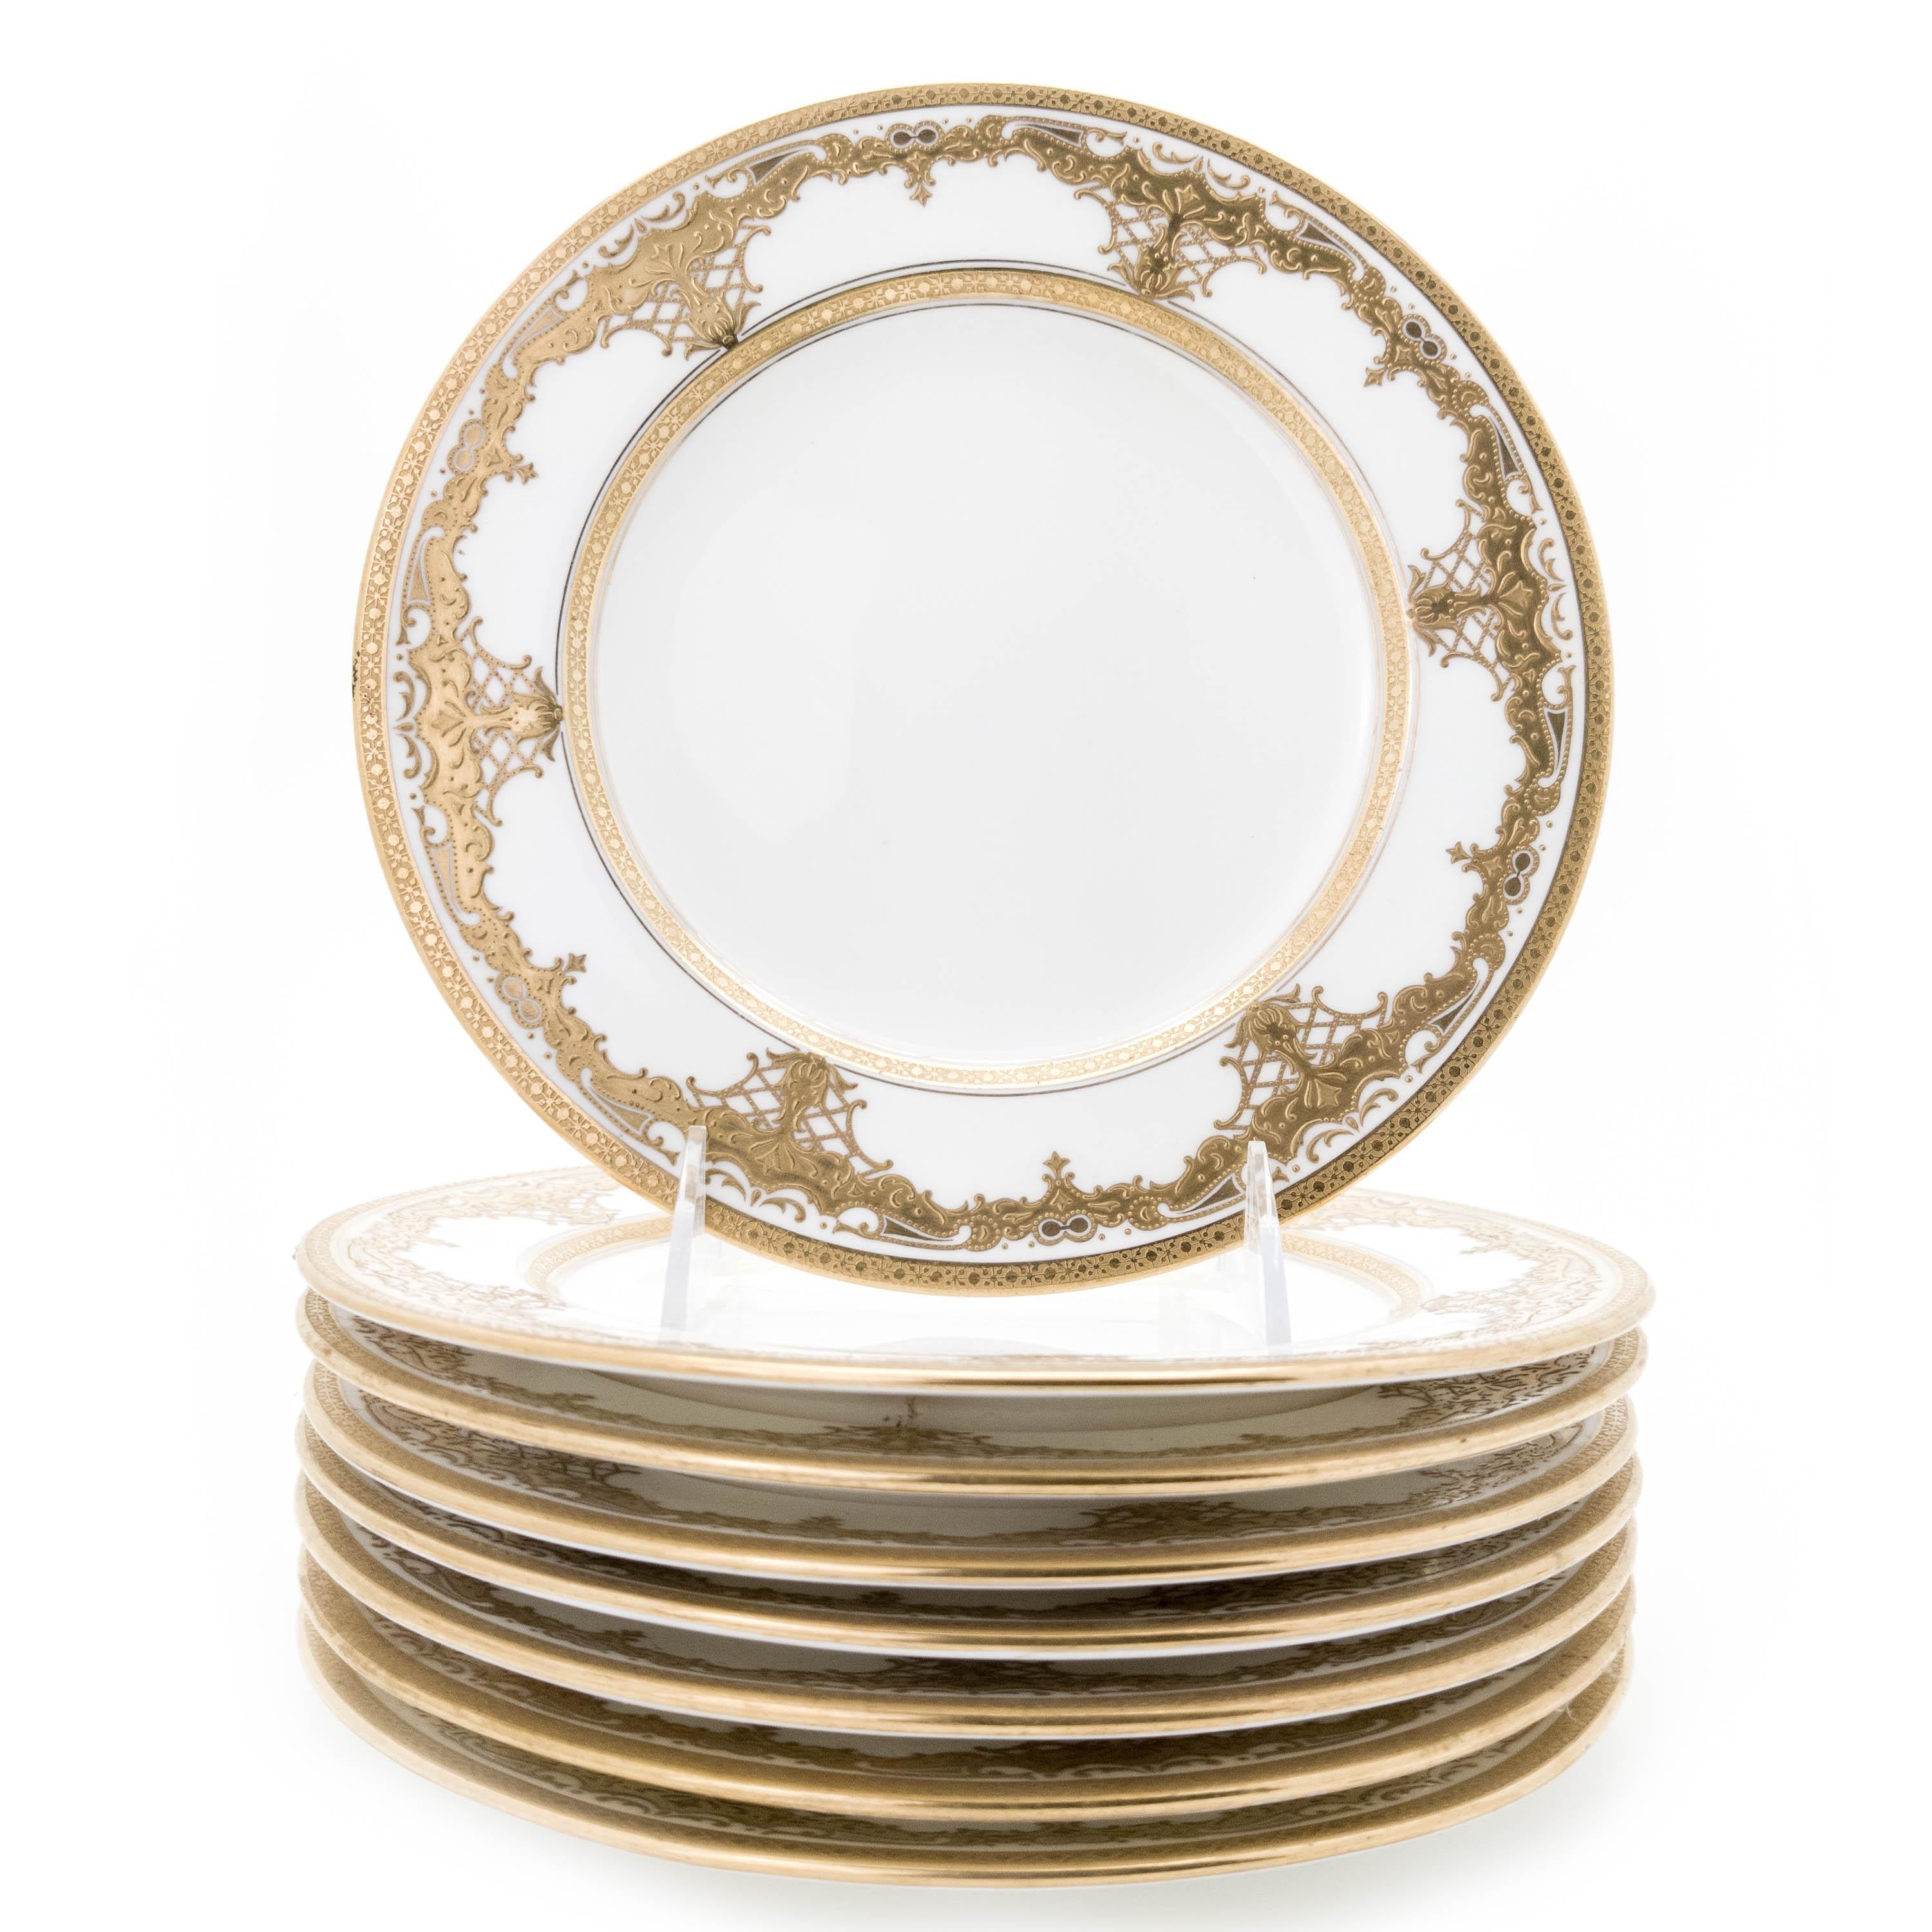 8  Tiffany White and Gold Gilt Encrusted Dessert Plates, Antique English  For Sale 1